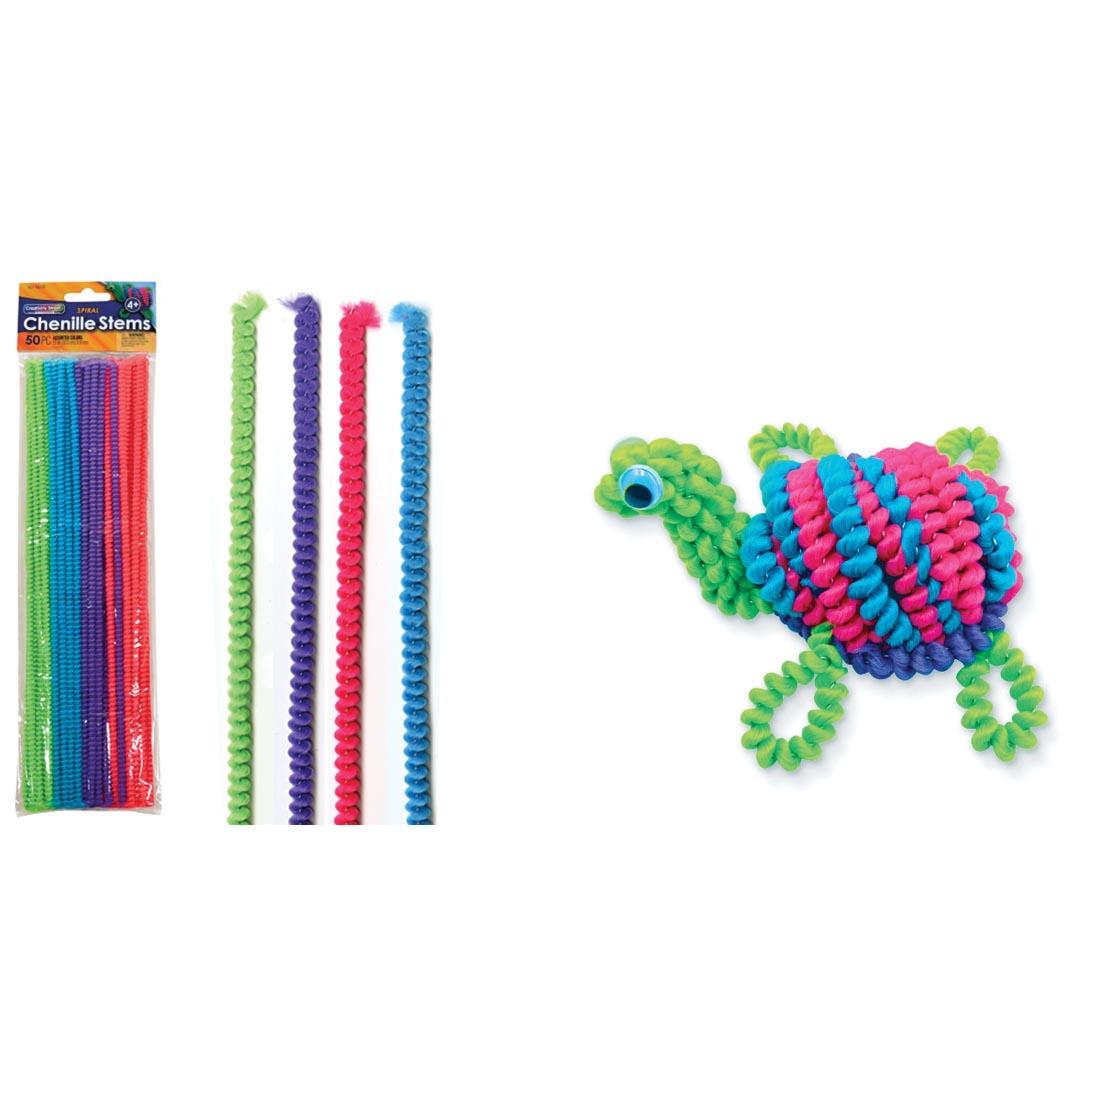 Creativity Street Spiral Chenille Stems package beside 4 individual colors, plus an example creation using them